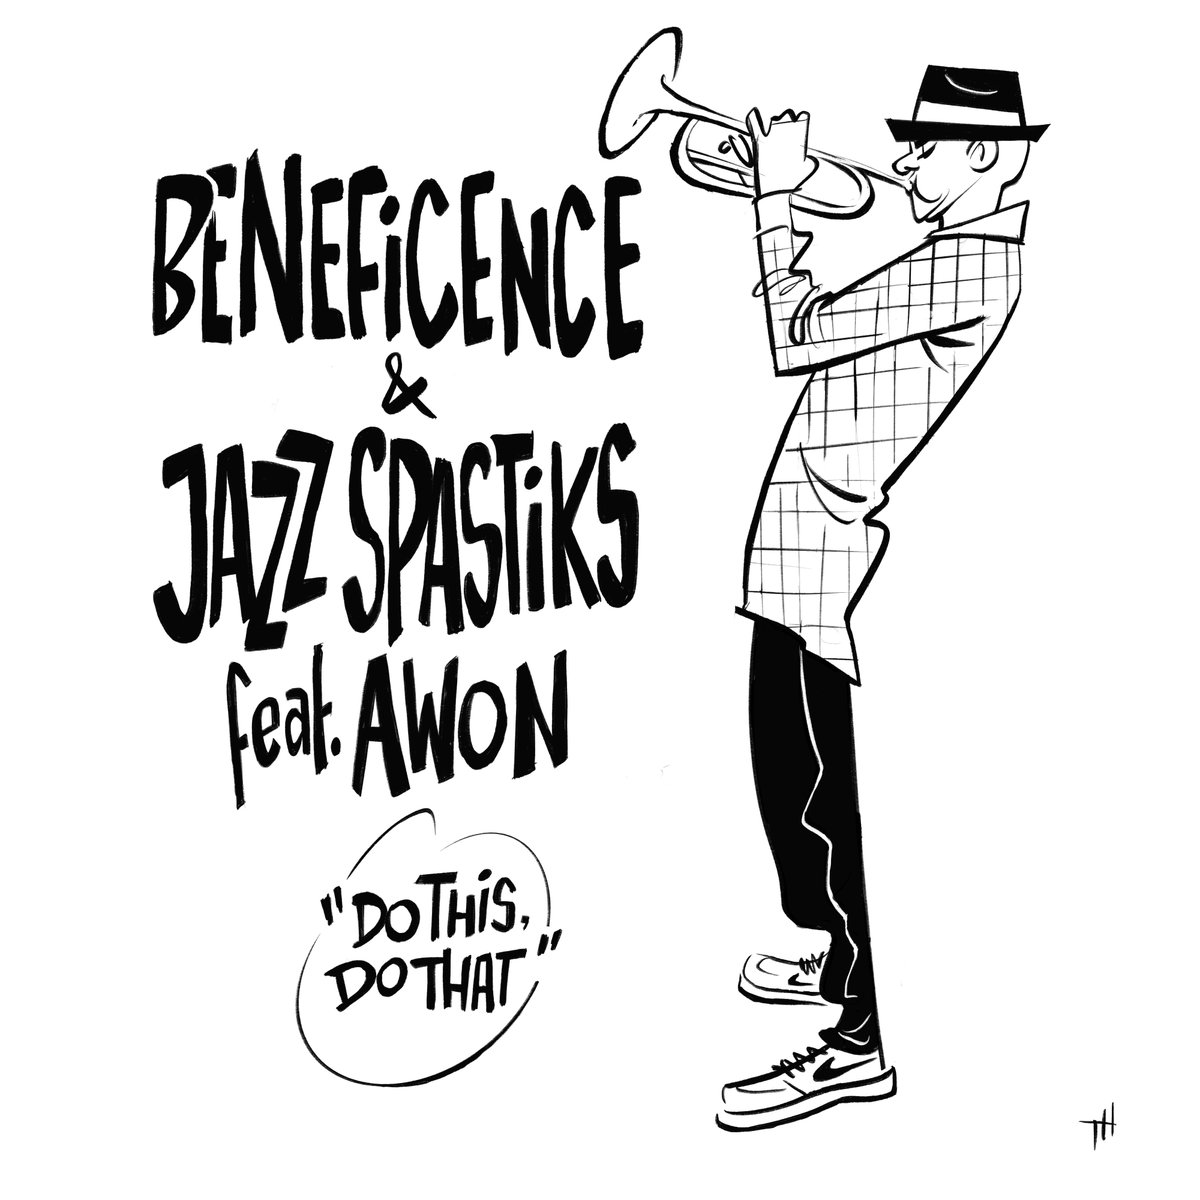 Now playing : @BeneficenceReal @Awon1988 ' Do This Do That ' @jazzspastiks @ApRock_HipHop in rotation on @1009WXIR @sftu585radio mixcloud.com/christopher-gr…